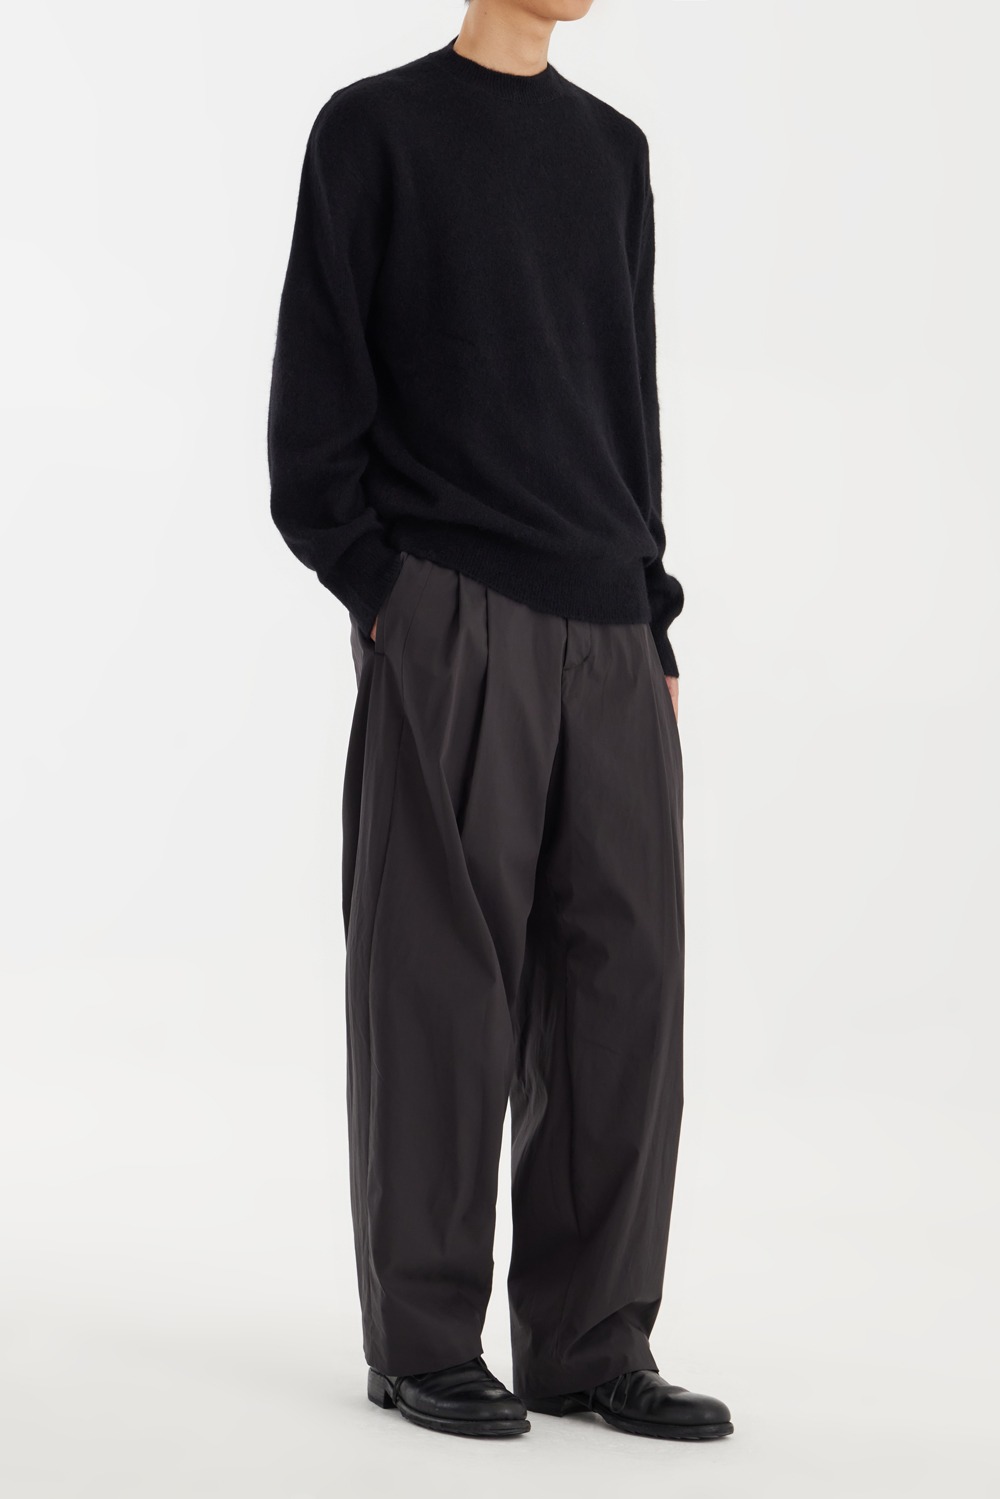 Banded Two Tuck Pants - Black